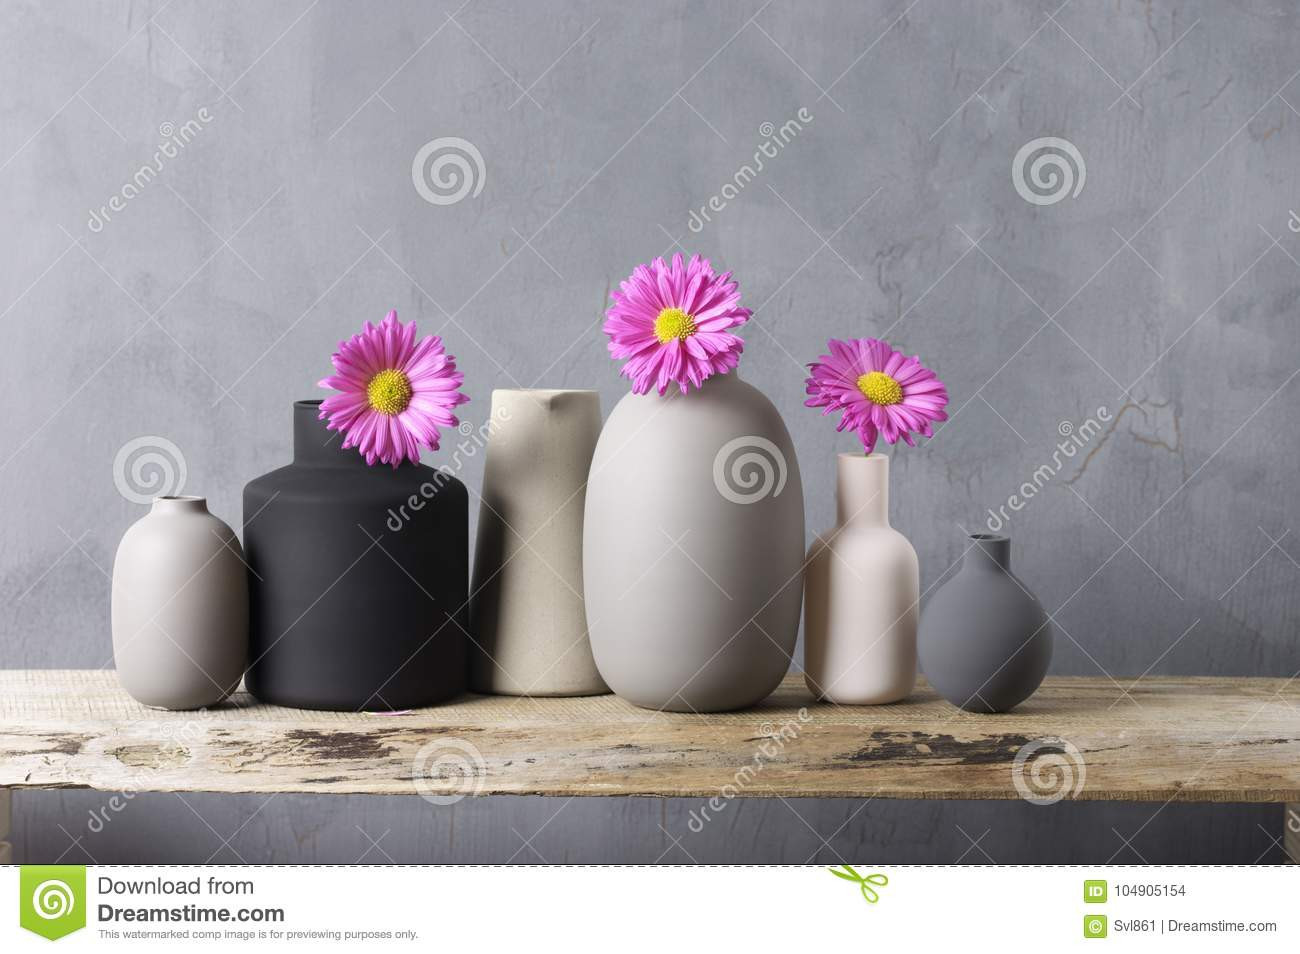 26 Best Cheap Home Decor Vases 2023 free download cheap home decor vases of various vases with flowers on wooden shelf stock photo image of in various vases with flowers on wooden shelf